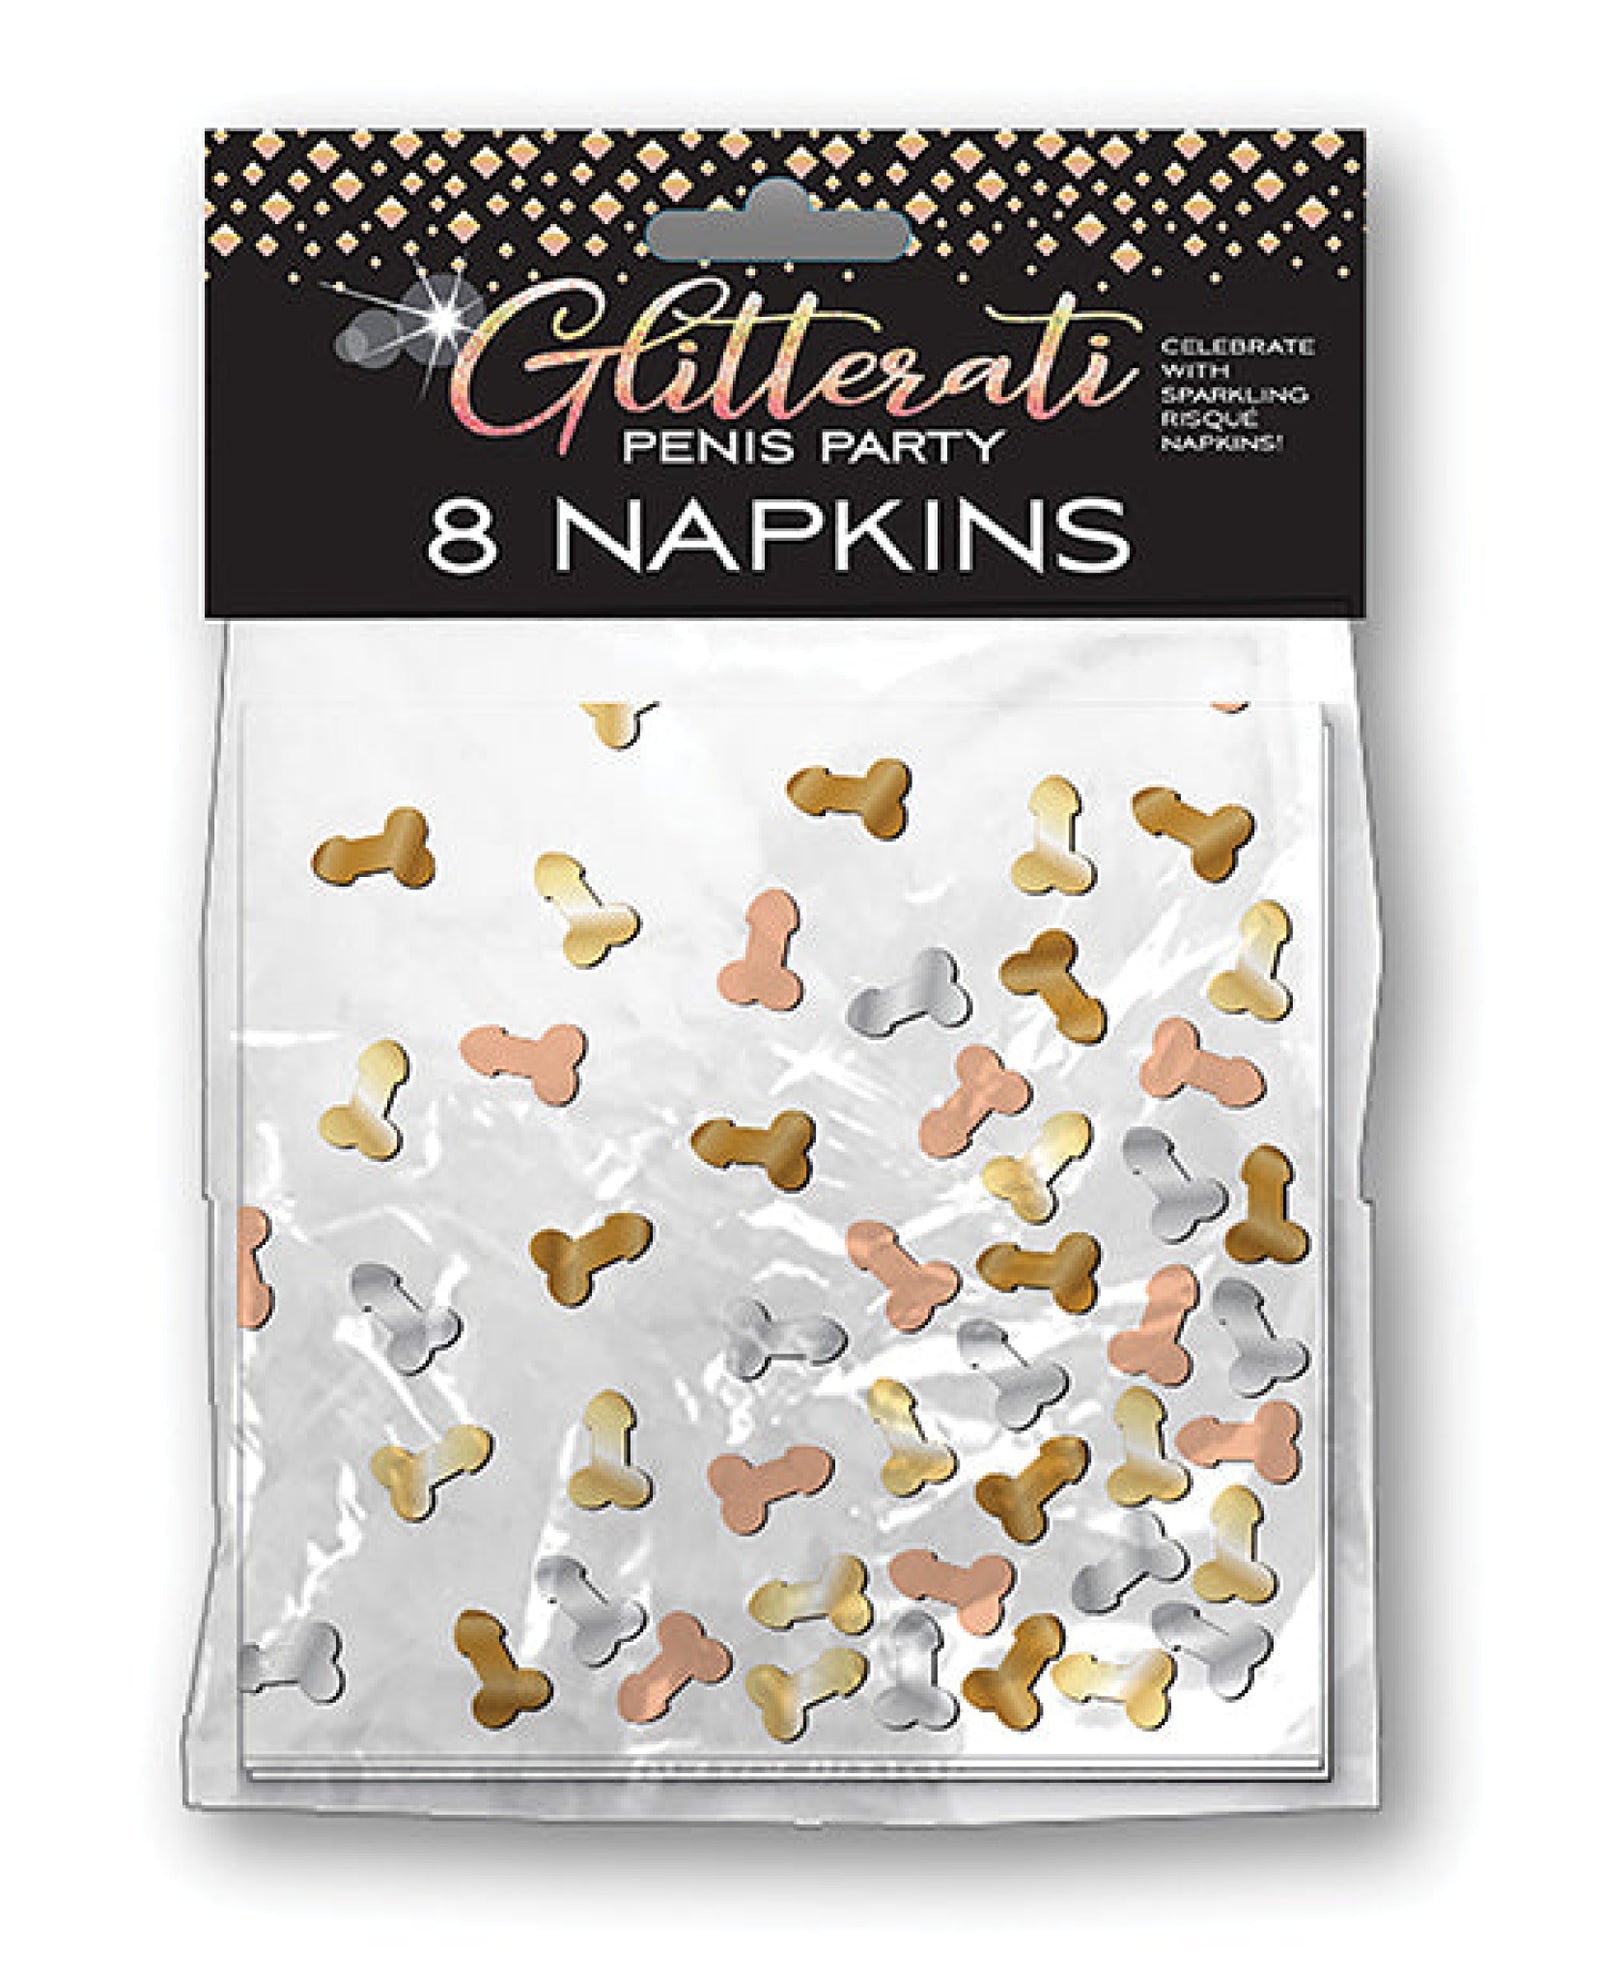 Glitterati Penis Party Napkins - Pack Of 8 Little Genie